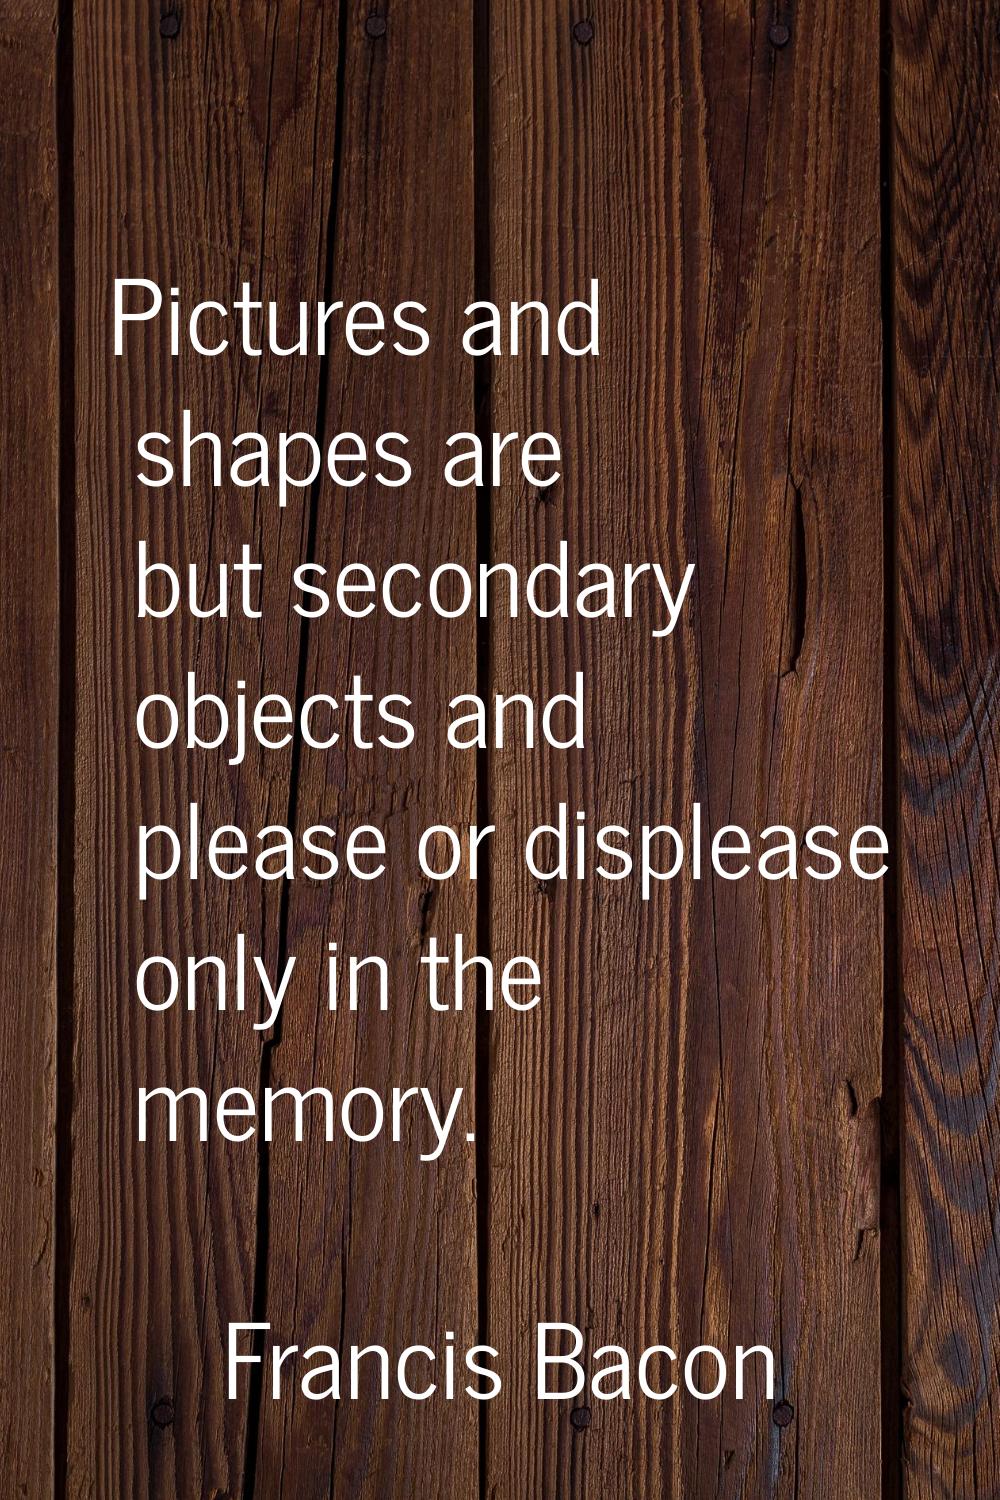 Pictures and shapes are but secondary objects and please or displease only in the memory.